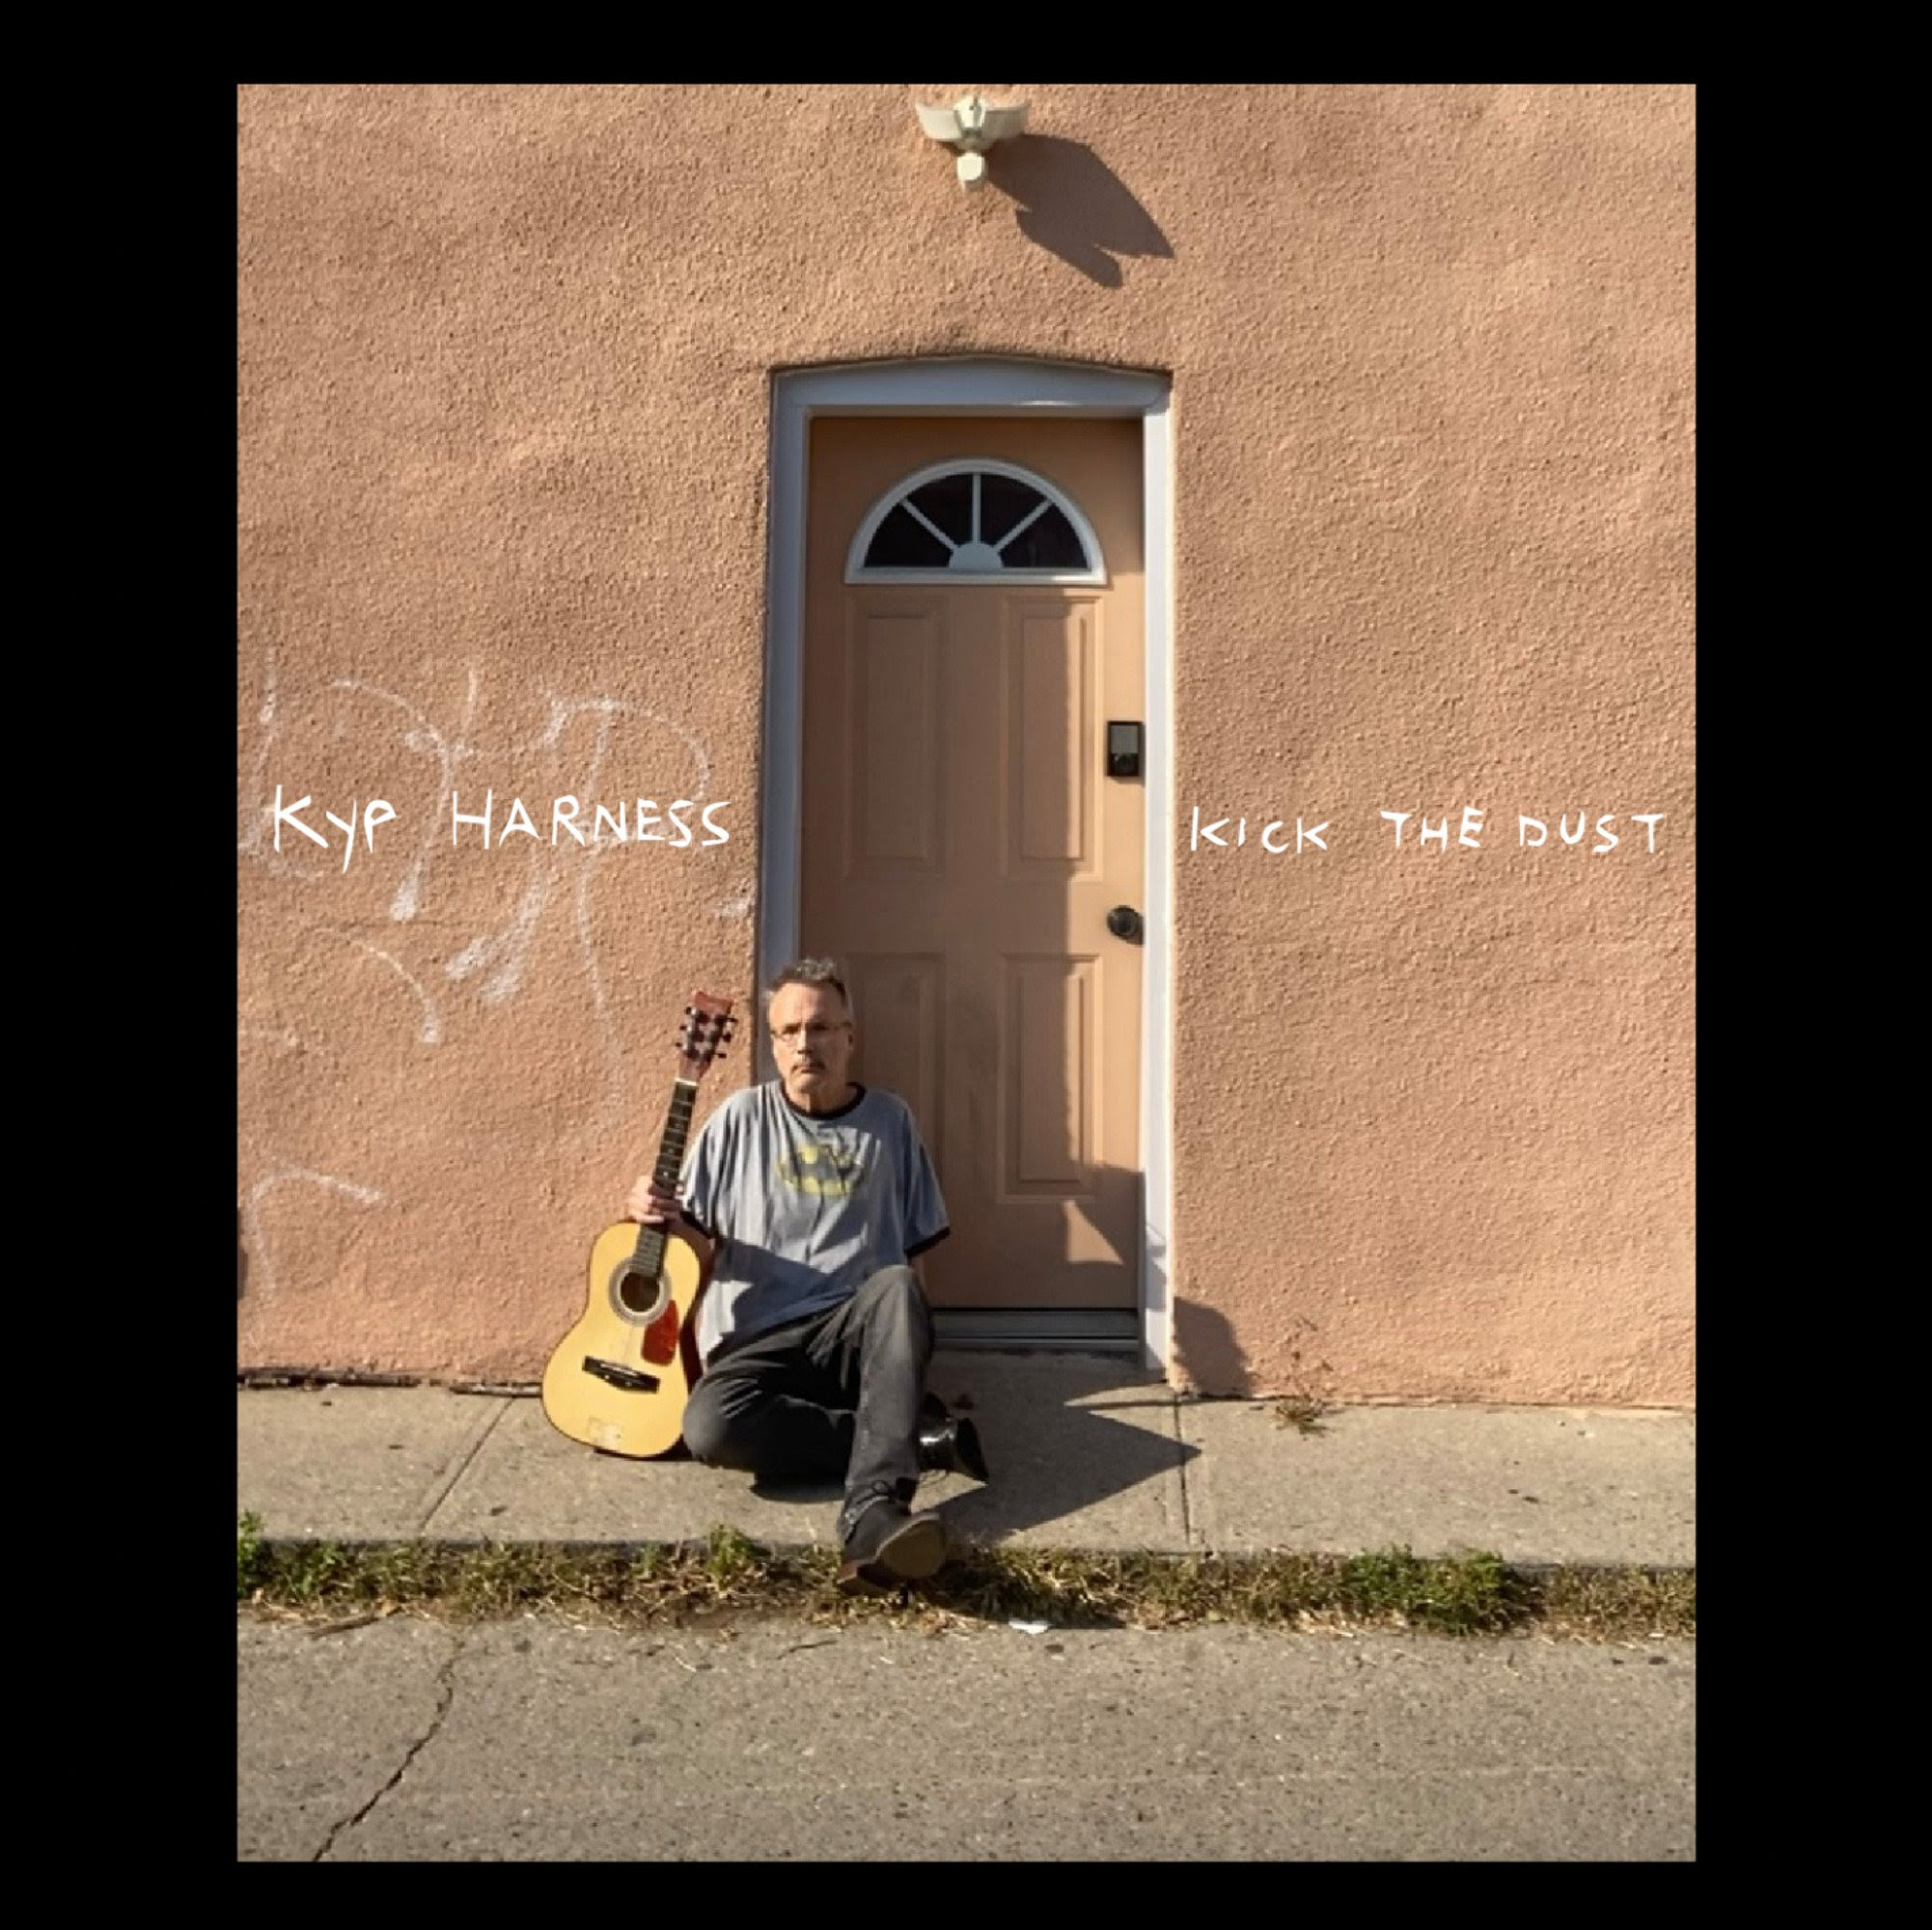 Toronto indie legend KYP HARNESS releases 18th album Kick The Dust